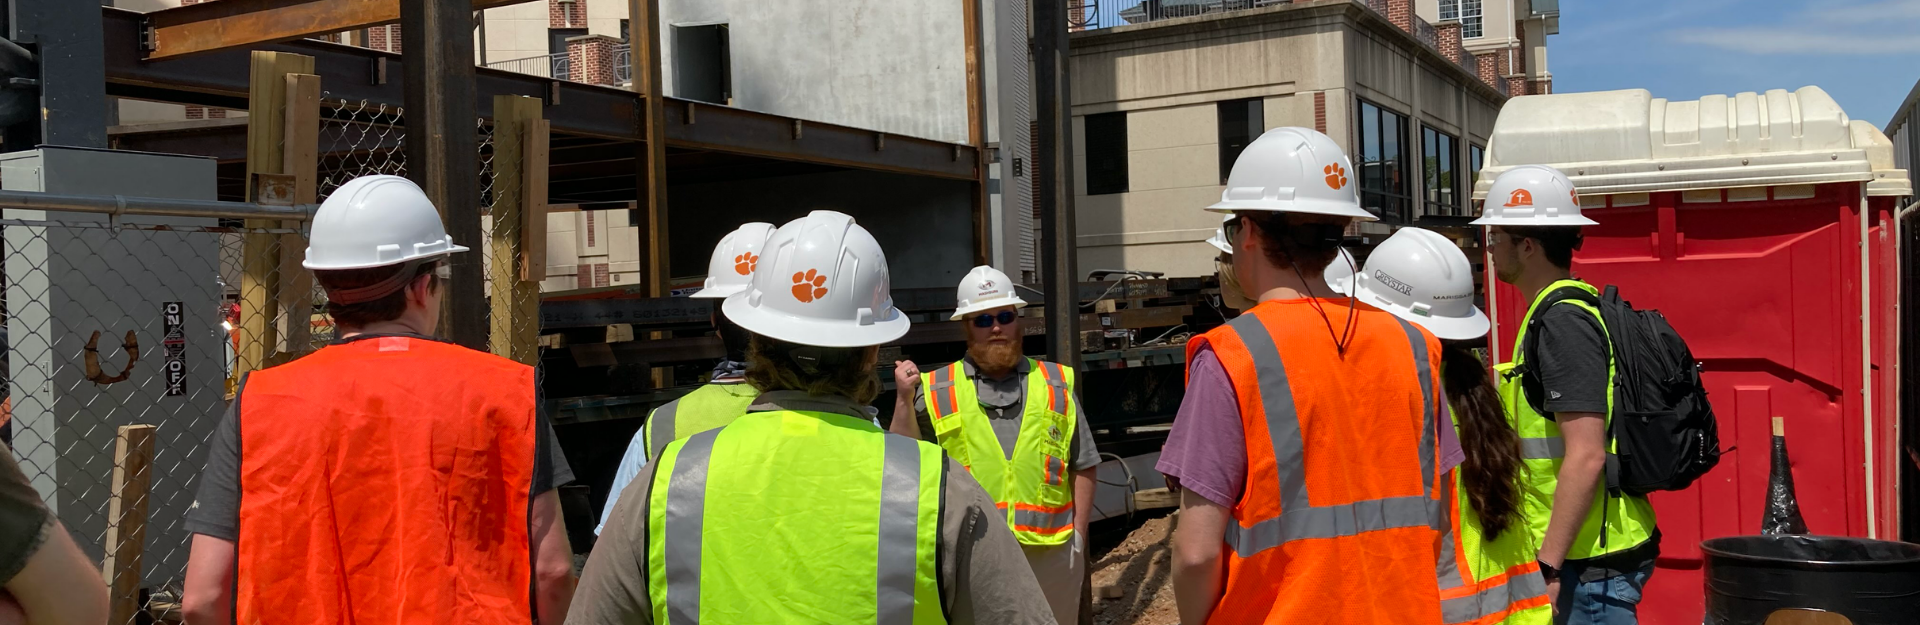 students touring a construction facility